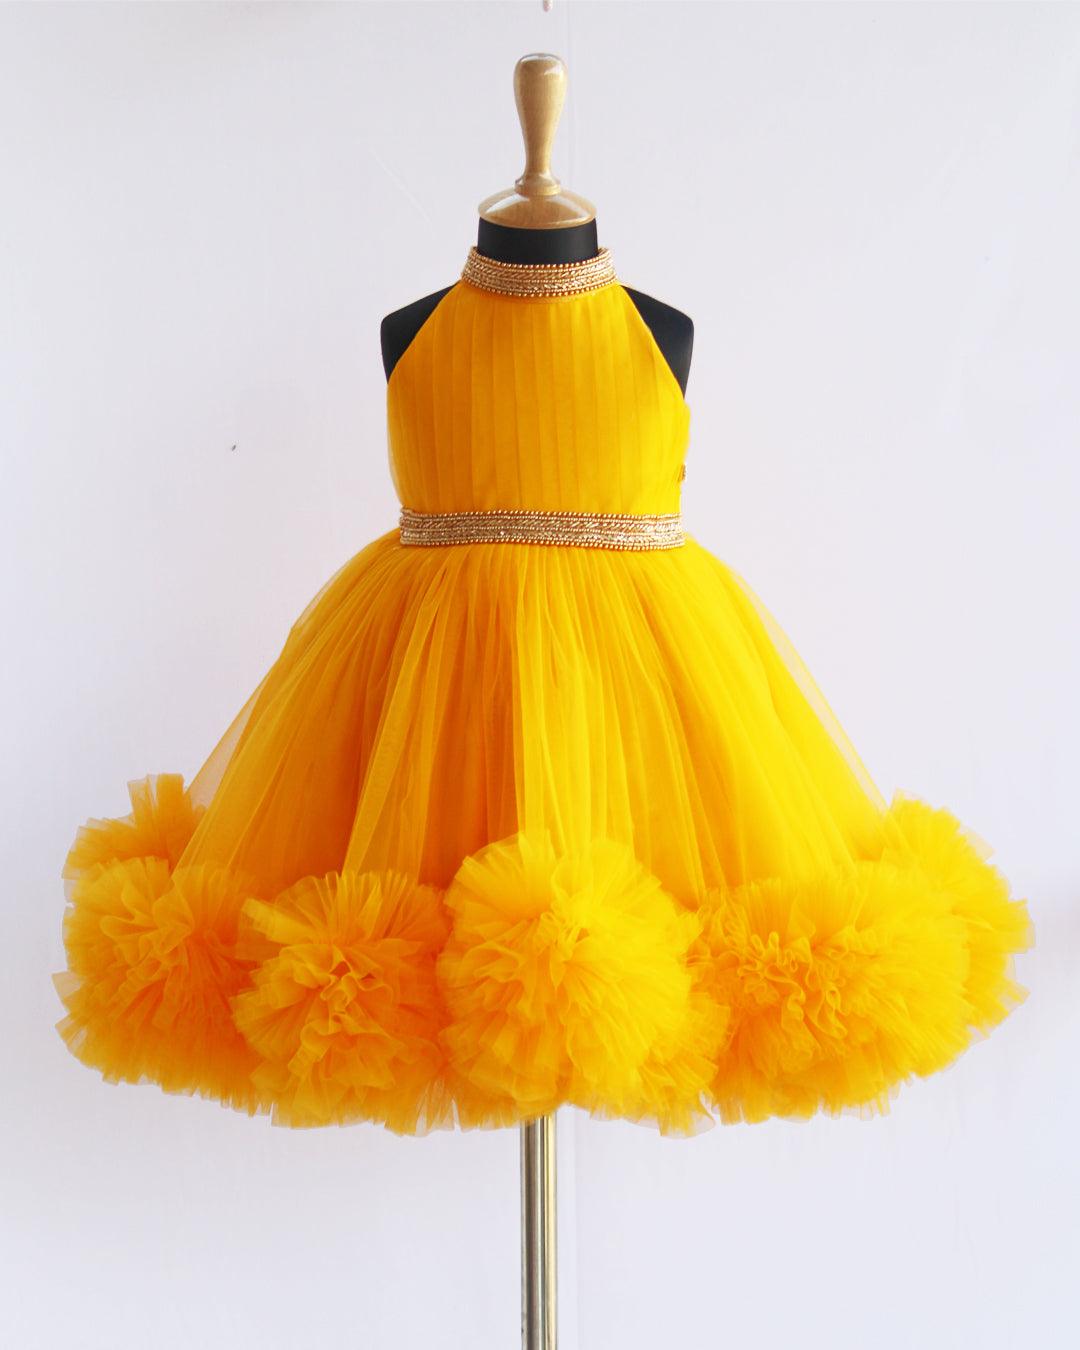 Mango Yellow Pleated Halter Neck Ruffled Frock.
Material : Mango Yellow  soft mono nylon net is mainly used for making this dress. Yoke portion is designed in a pleated pattern with halter neck design. Skirt port